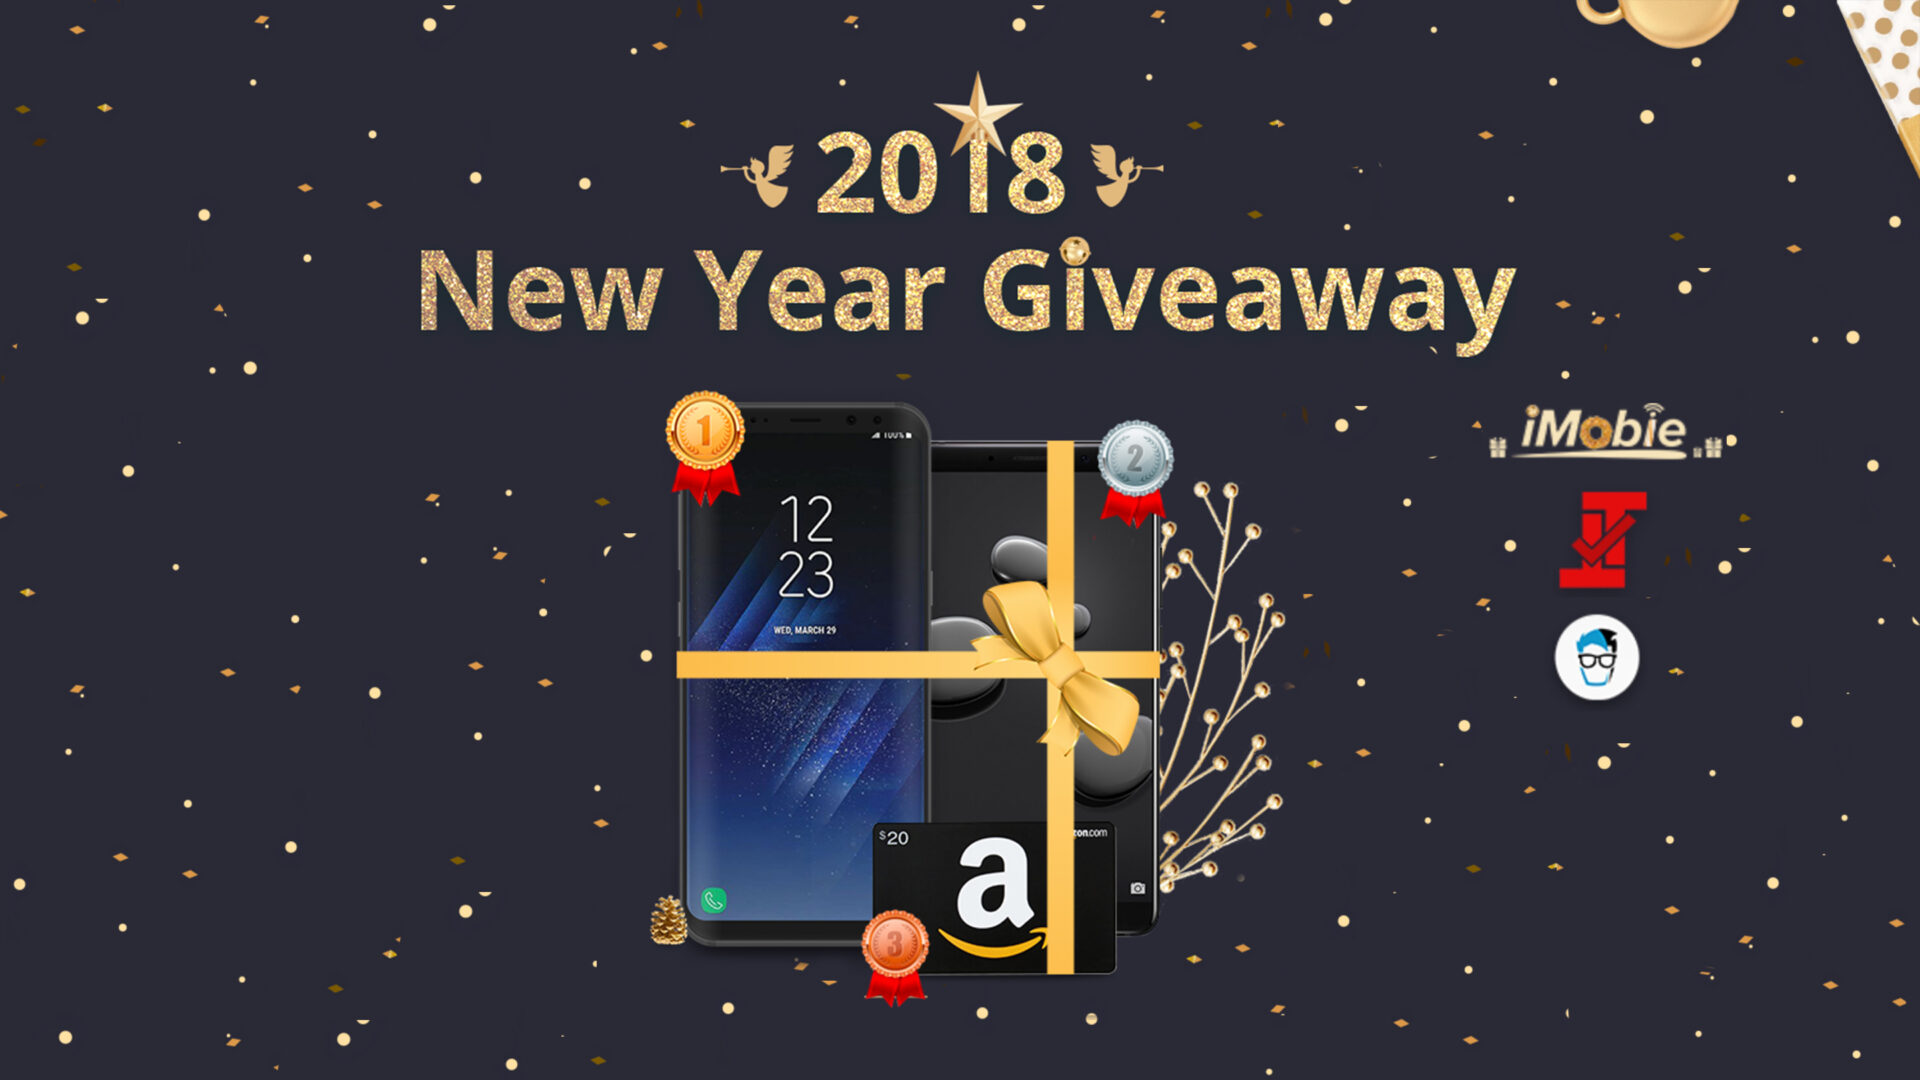 True Tech New Years Giveaway – New Year Massive Giveaway 2018 – Samsung Galaxy S8, Huawei Mate 10 And More | Truetech